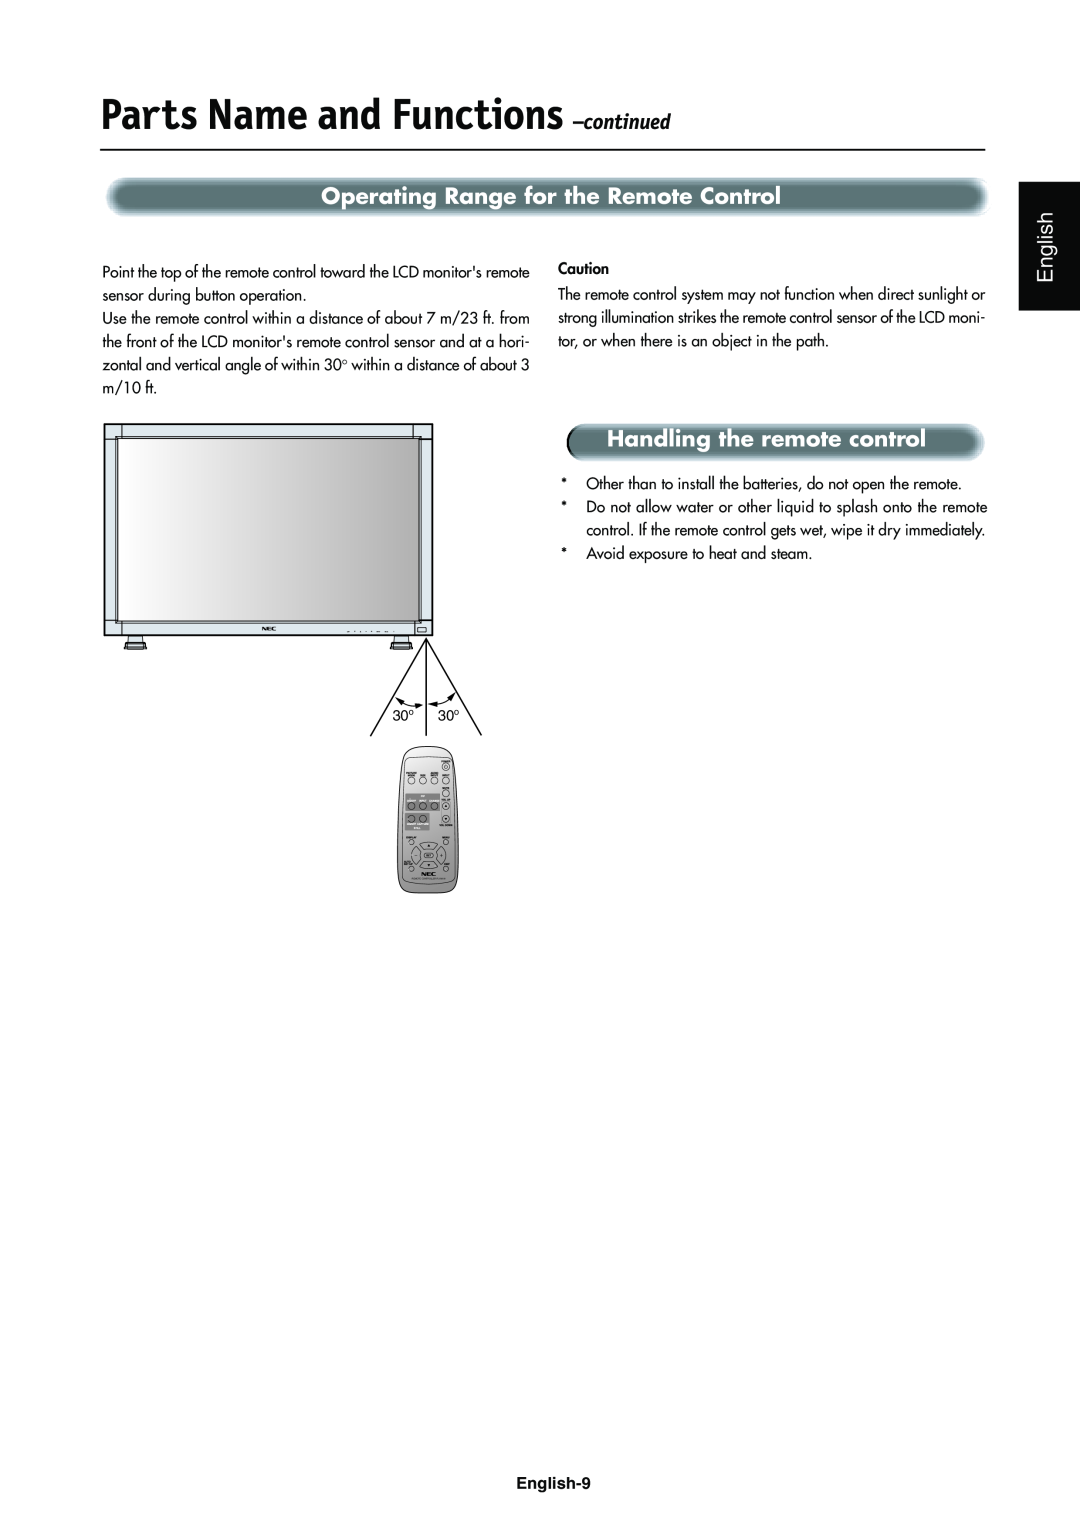 NEC LCD4000e Operating Range for the Remote Control, Handling the remote control, Parts Name and Functions –continued 